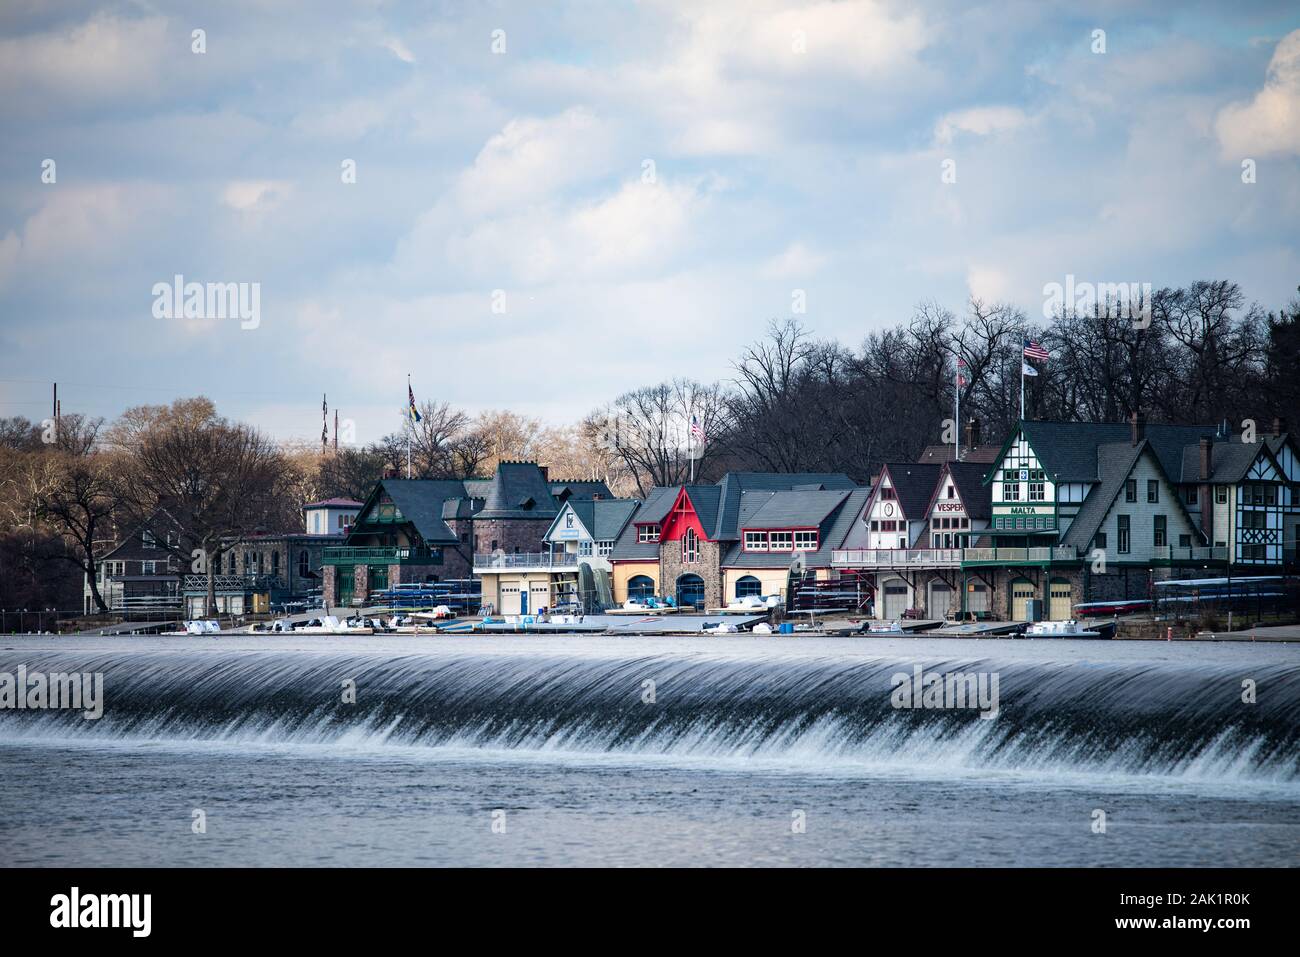 A view of Philadelphia's famous Boathouse Row visible behind the weir at the historic Water Works. Stock Photo